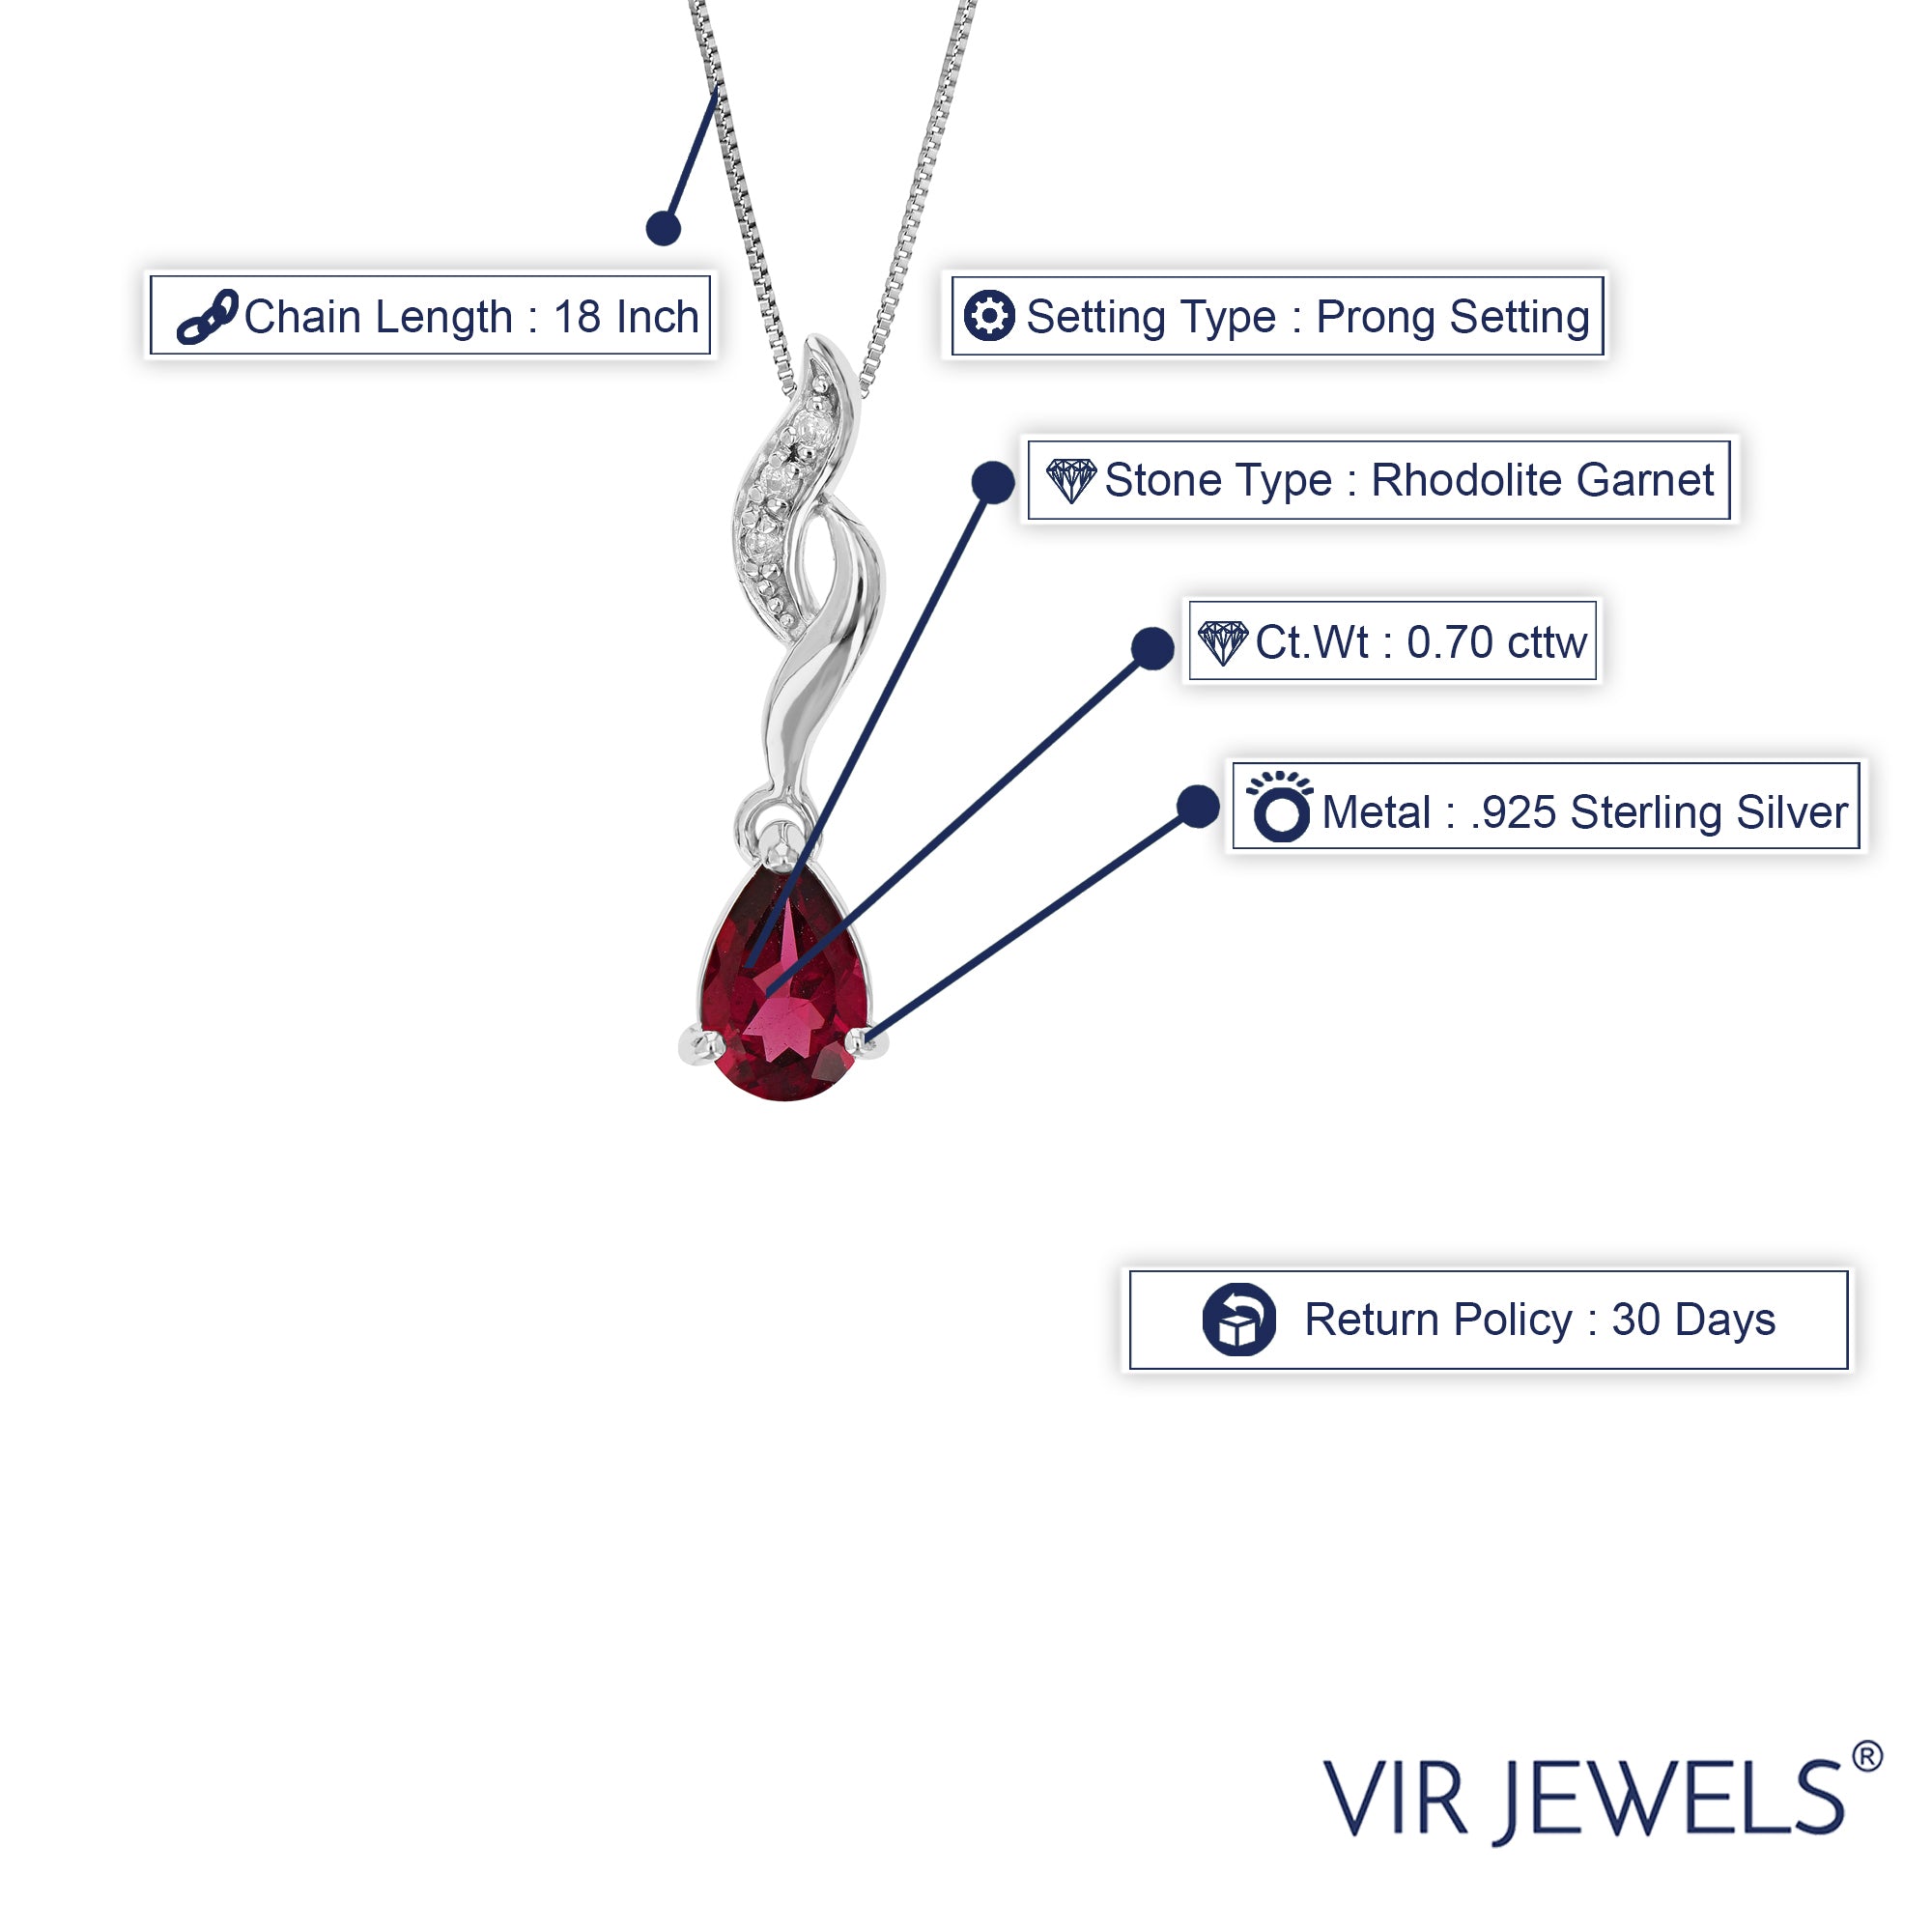 0.70 cttw Pendant Necklace, Garnet Pear Shape Pendant Necklace for Women in .925 Sterling Silver with Rhodium, 18 Inch Chain, Prong Setting